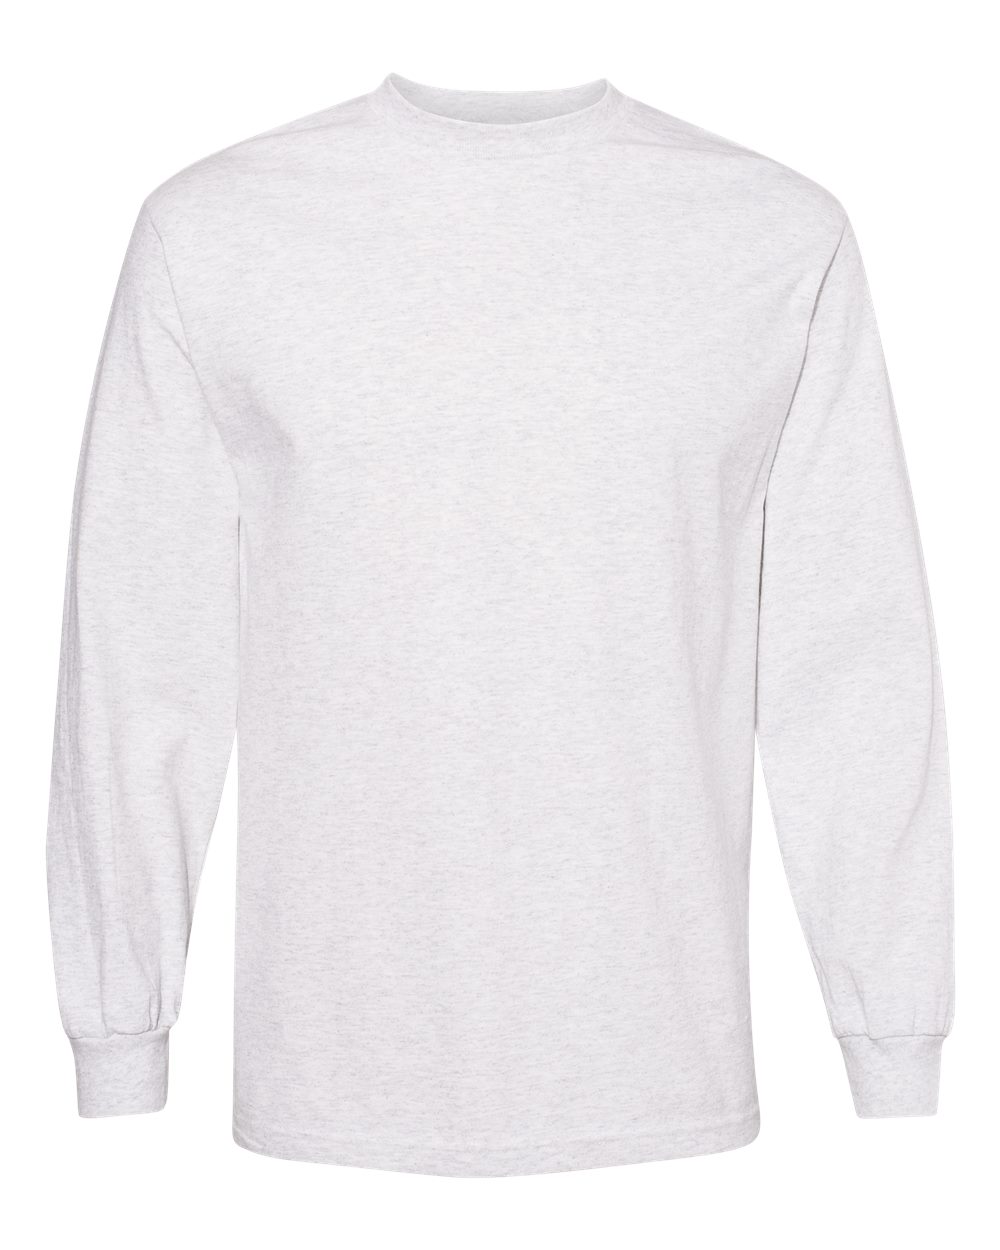 ALSTYLE Mens Cotton Blank Classic Long Sleeve Tee T Shirt 1304 up to ...